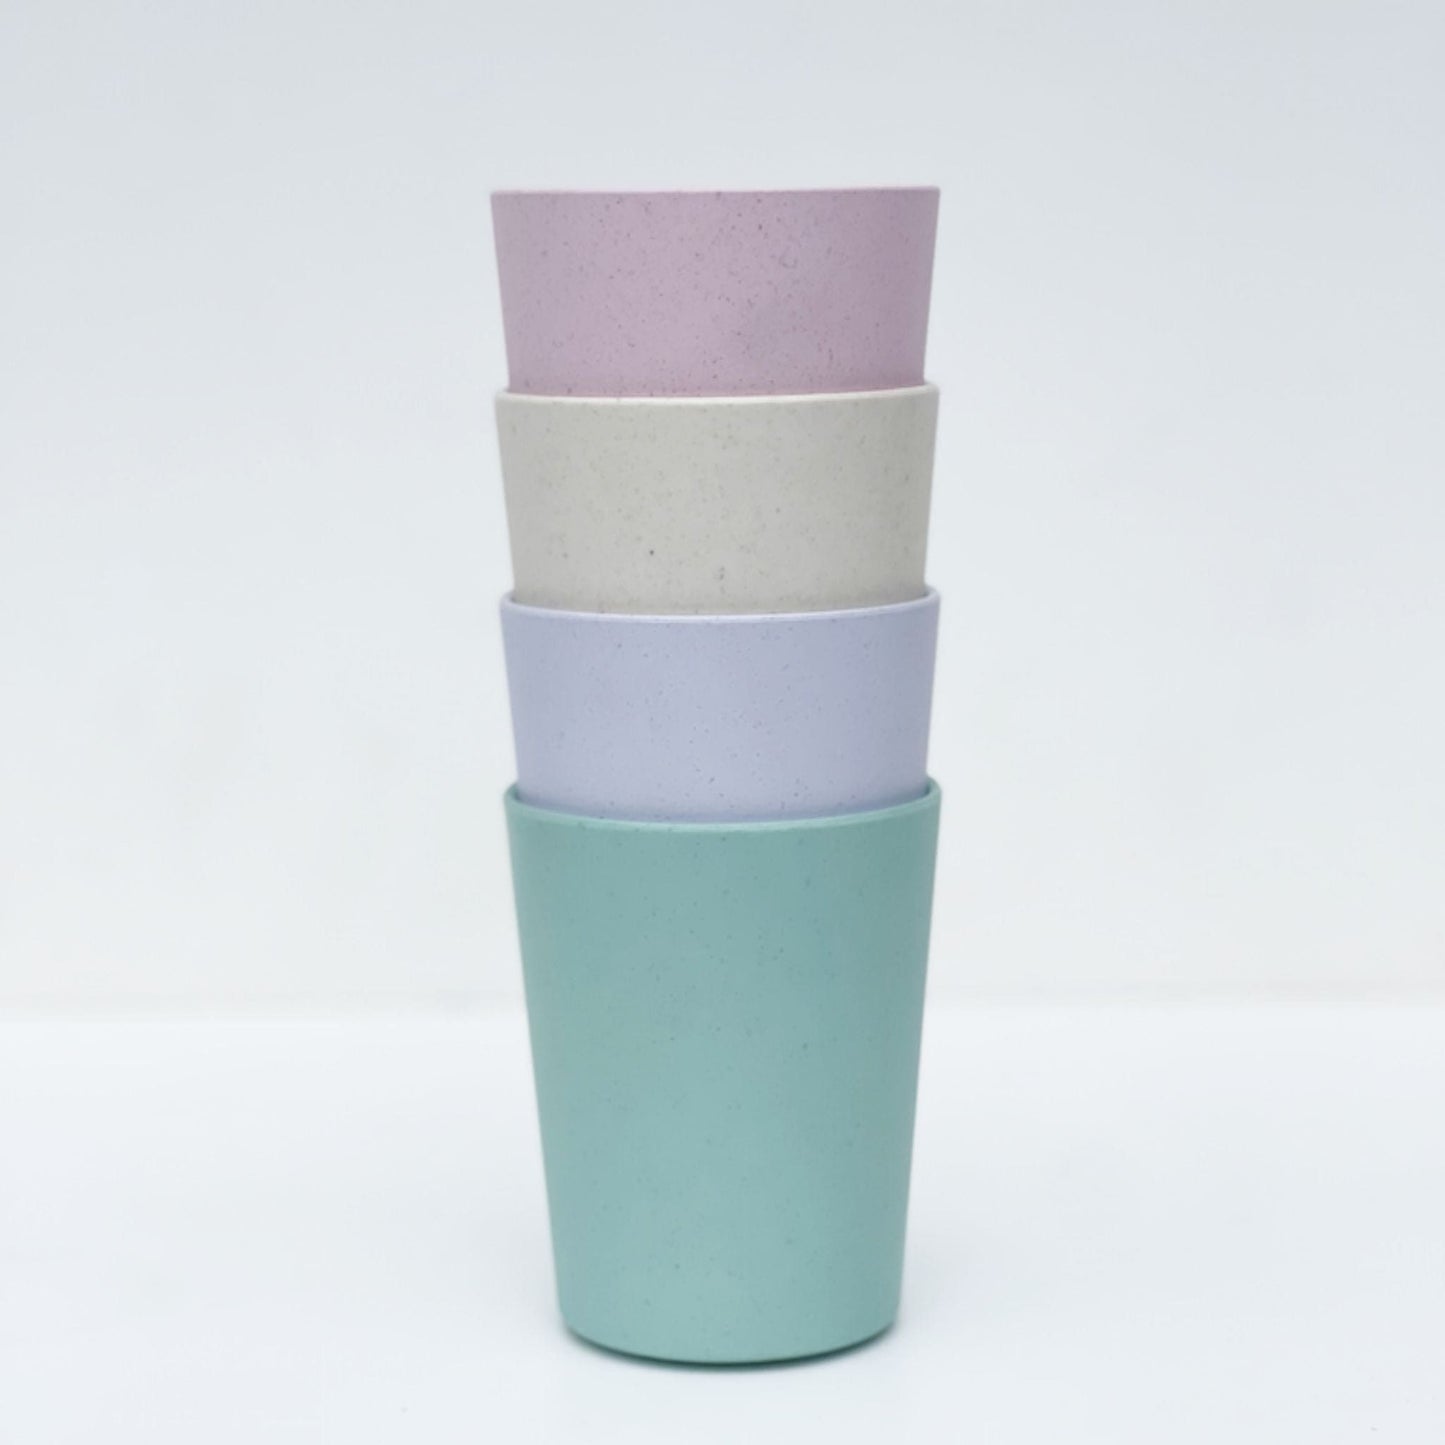 Amelia Frank Children's Bamboo Cups, Set of 4